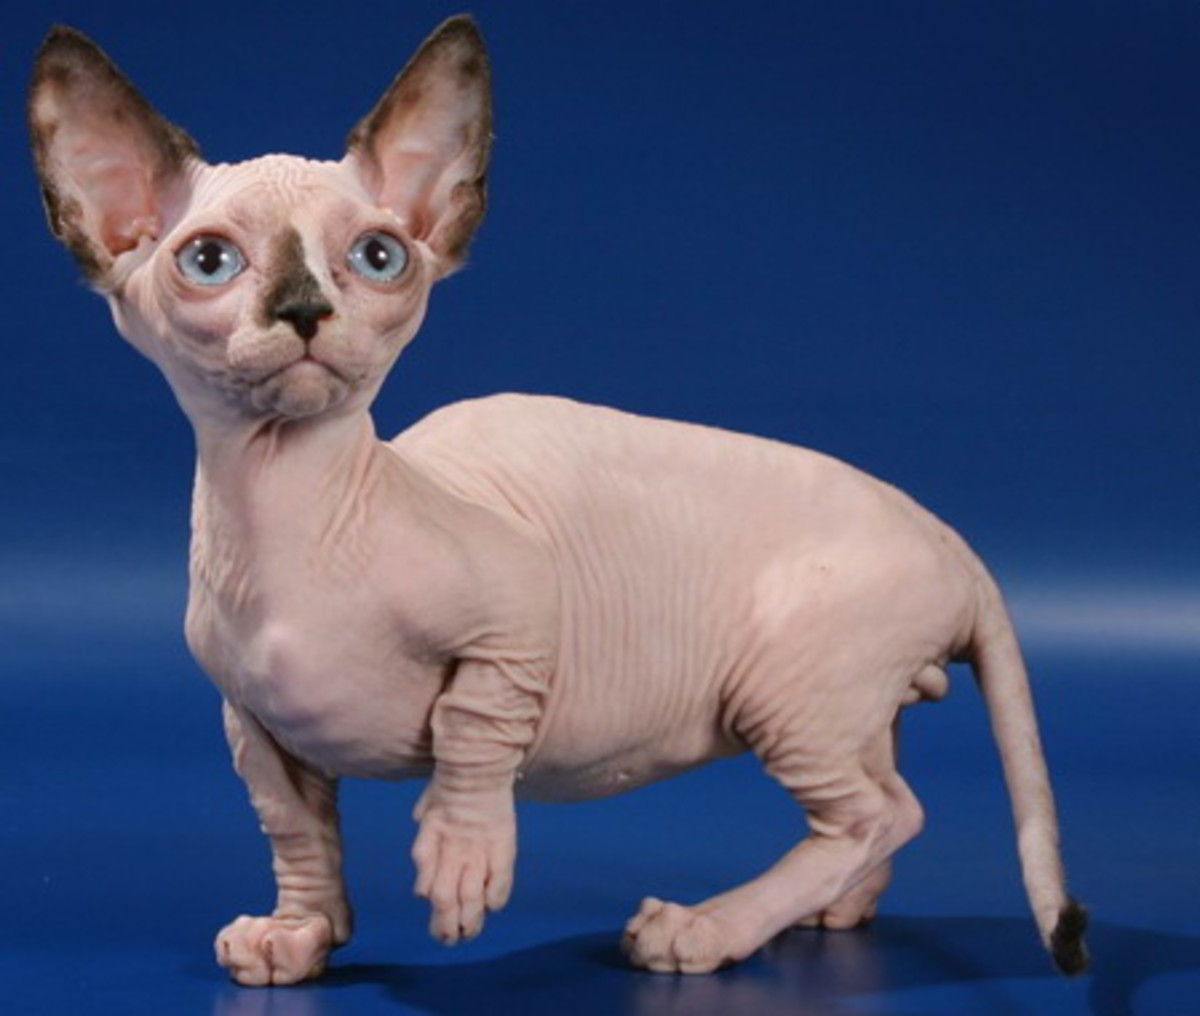 Bambino is a fairly new breed of cat developed from a cross between a Sphynx and the Munchkin.